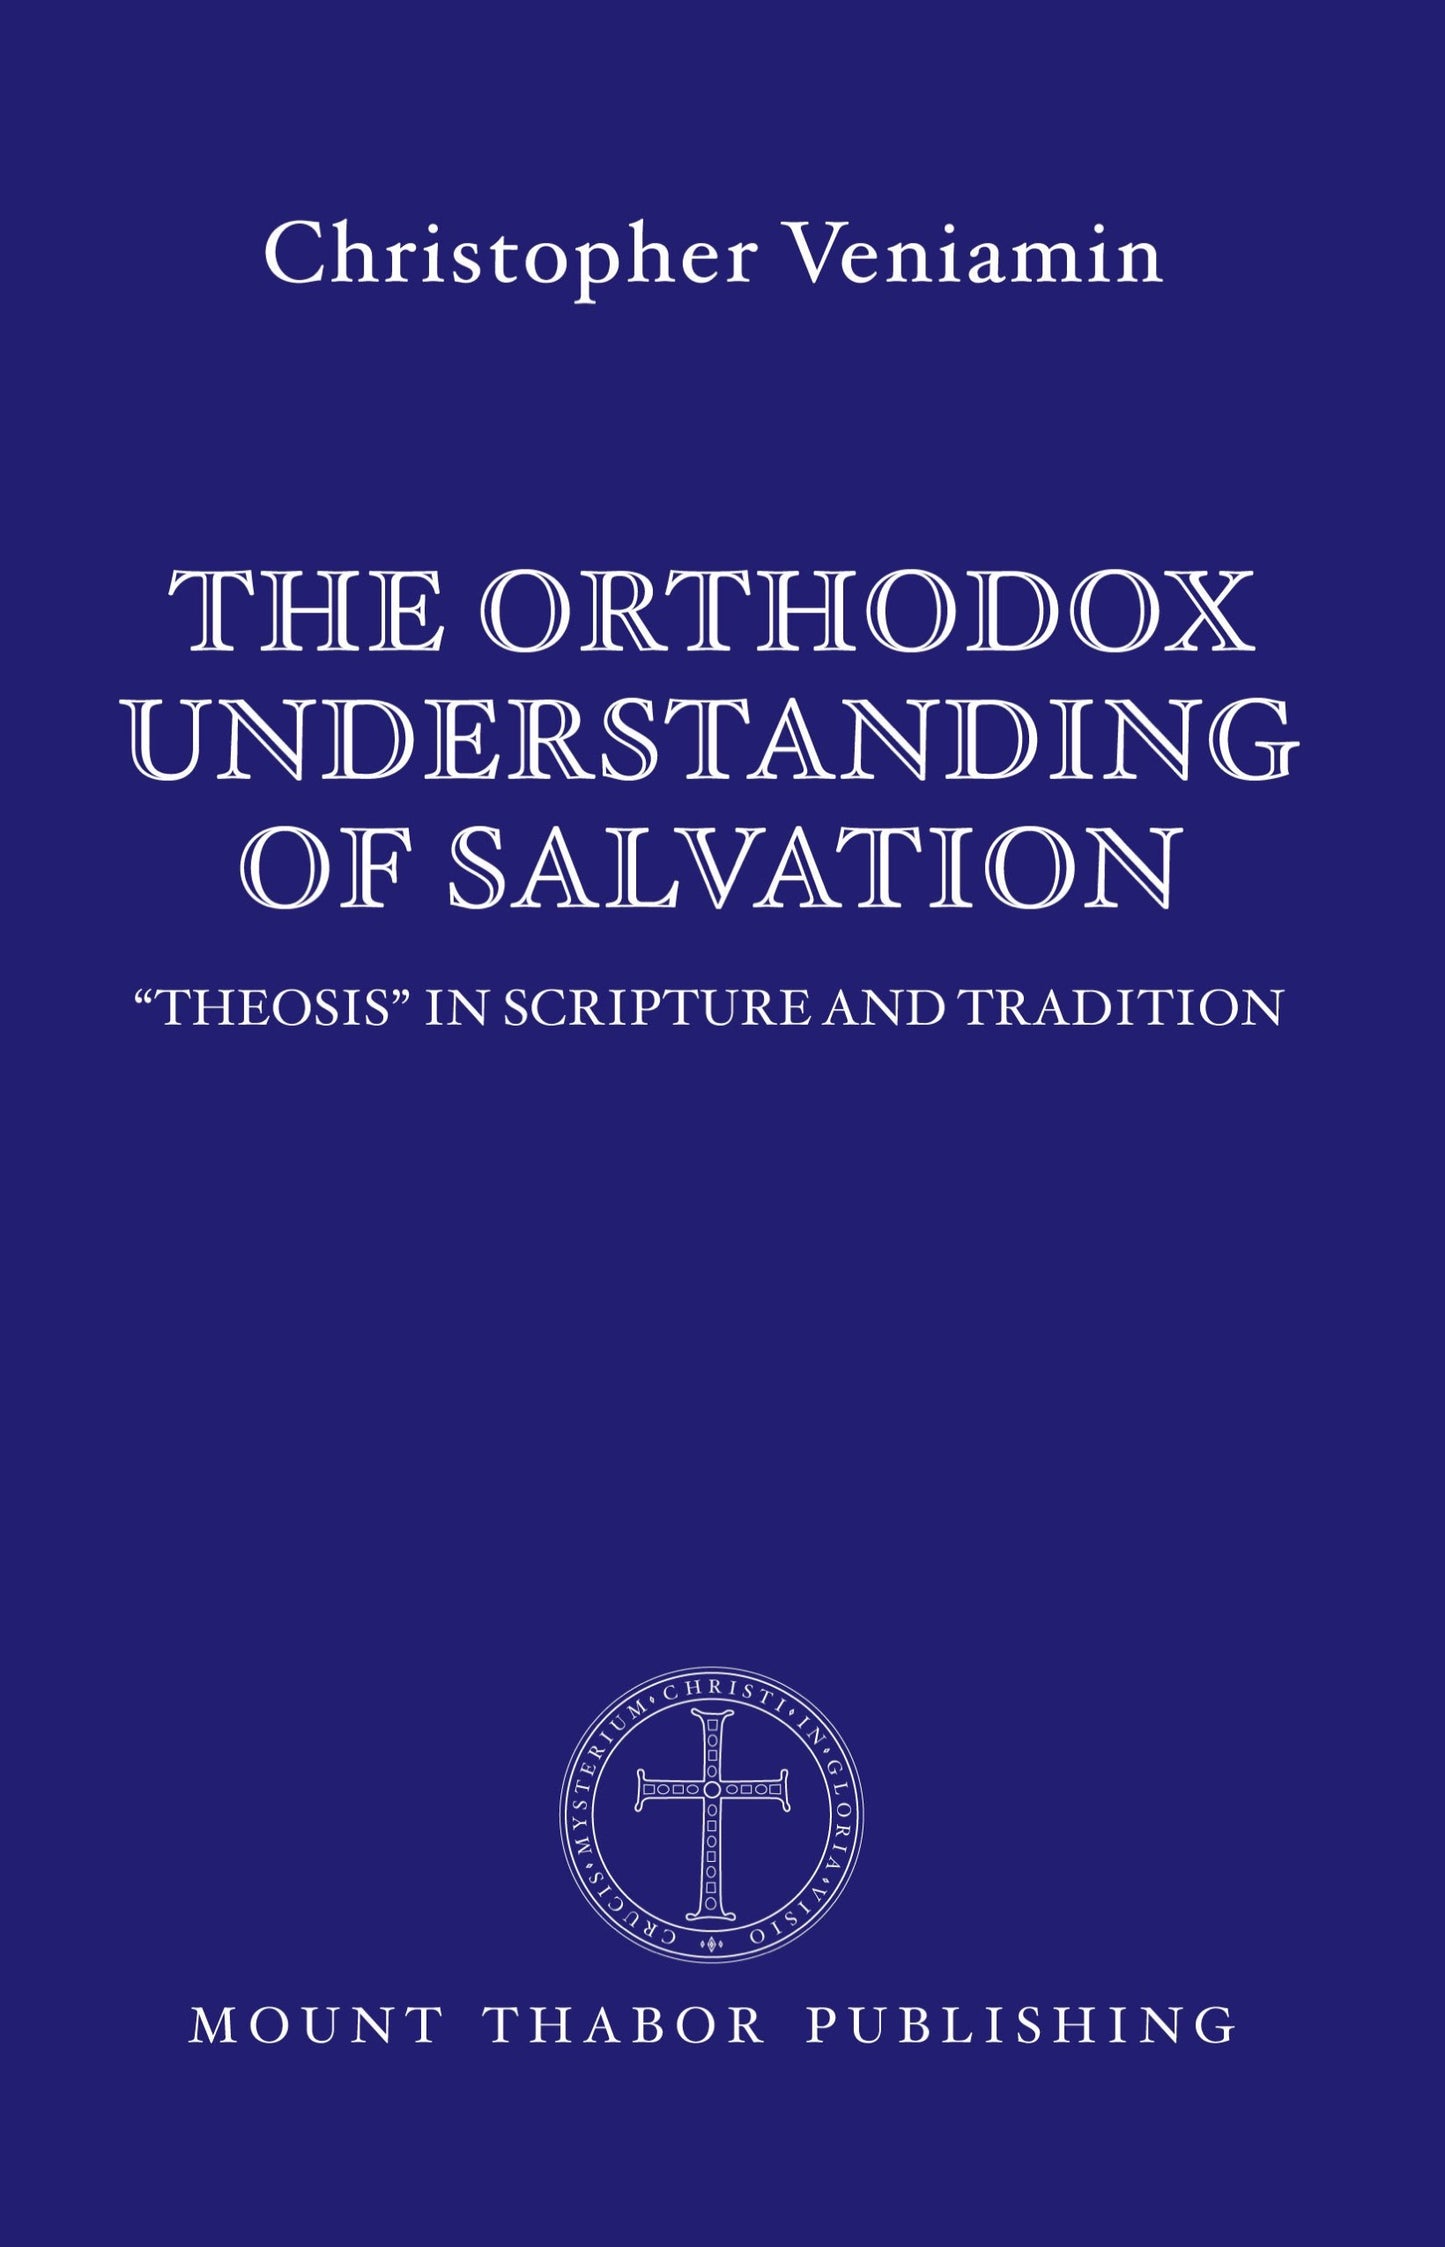 Front Cover of The Orthodox Understanding of Salvation by Dr. Christopher Veniamin